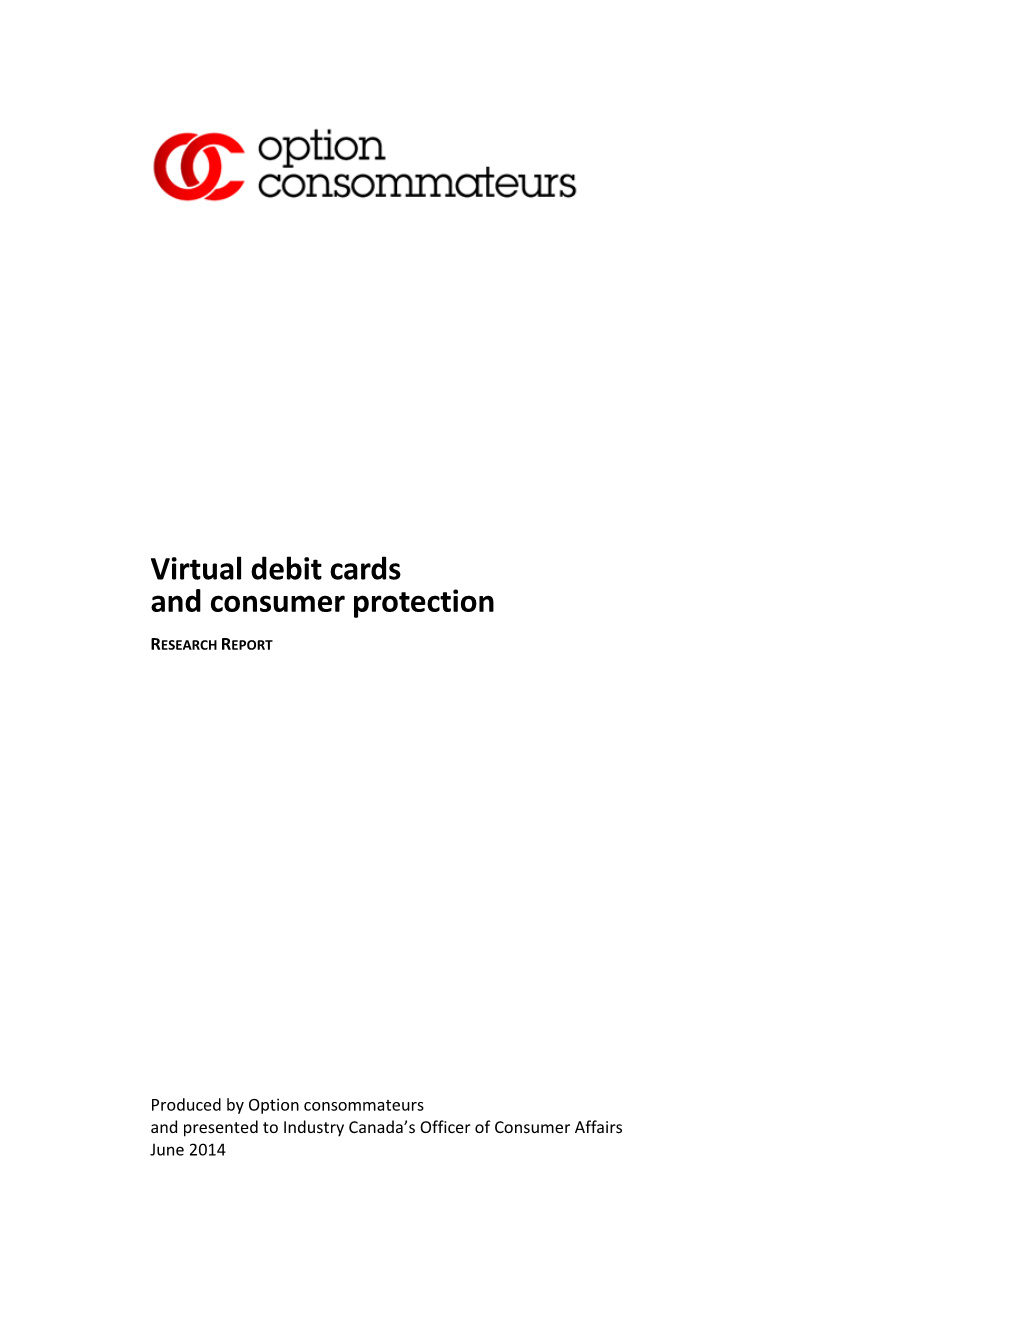 Virtual Debit Cards and Consumer Protection